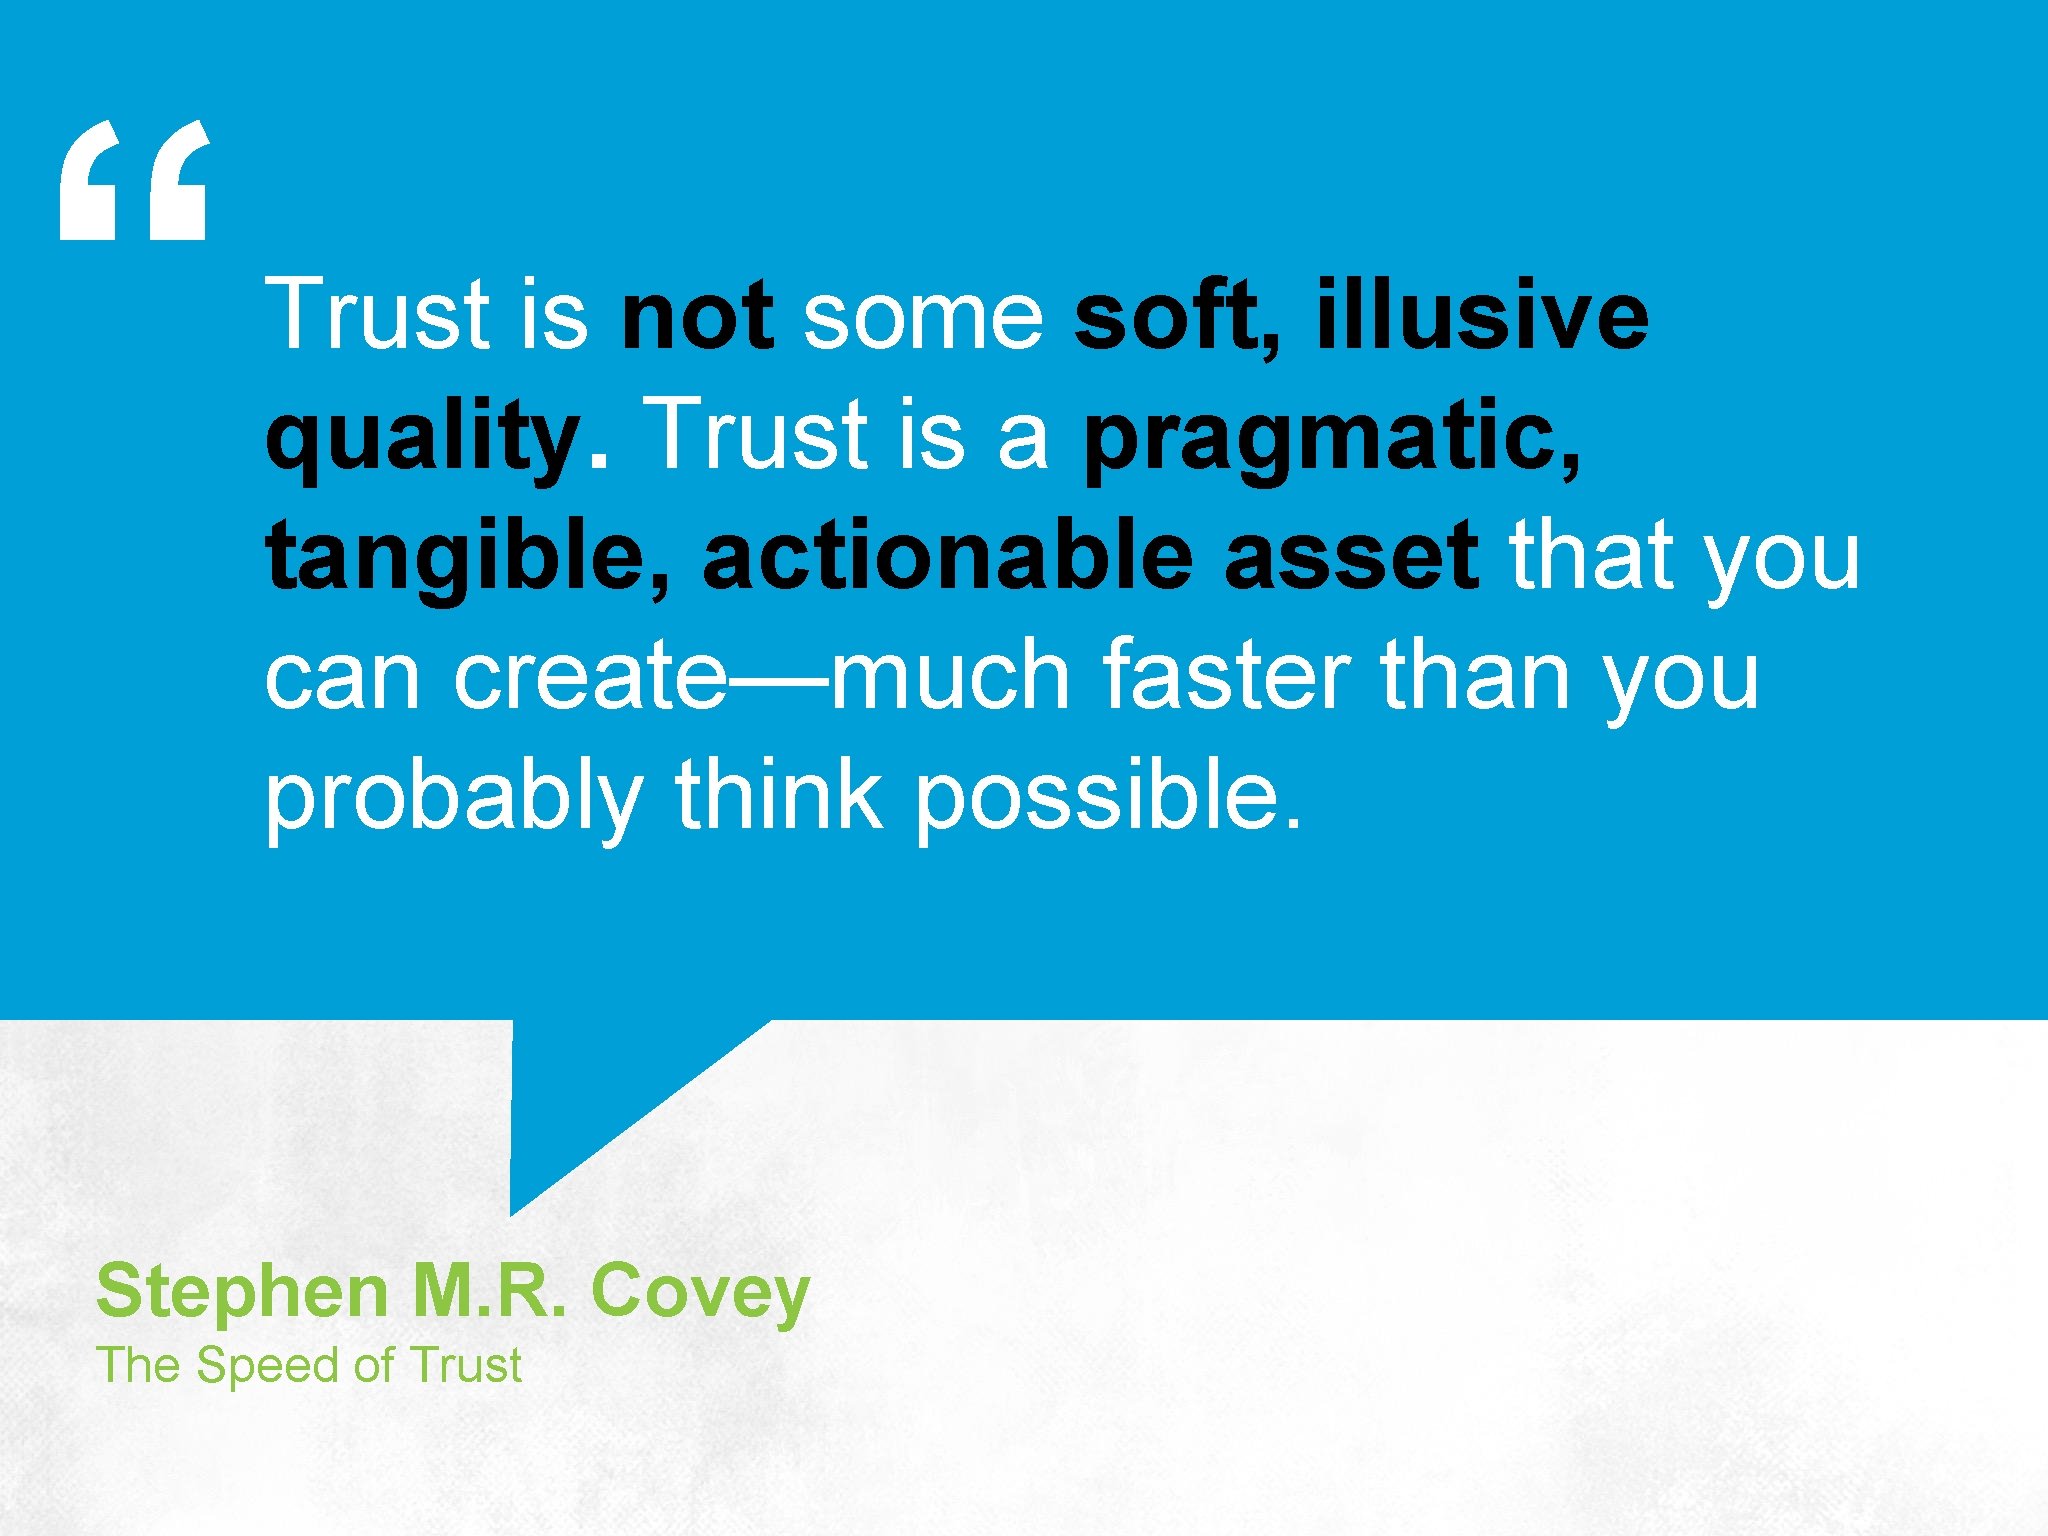 “ Trust is not some soft, illusive quality. Trust is a pragmatic, tangible, actionable